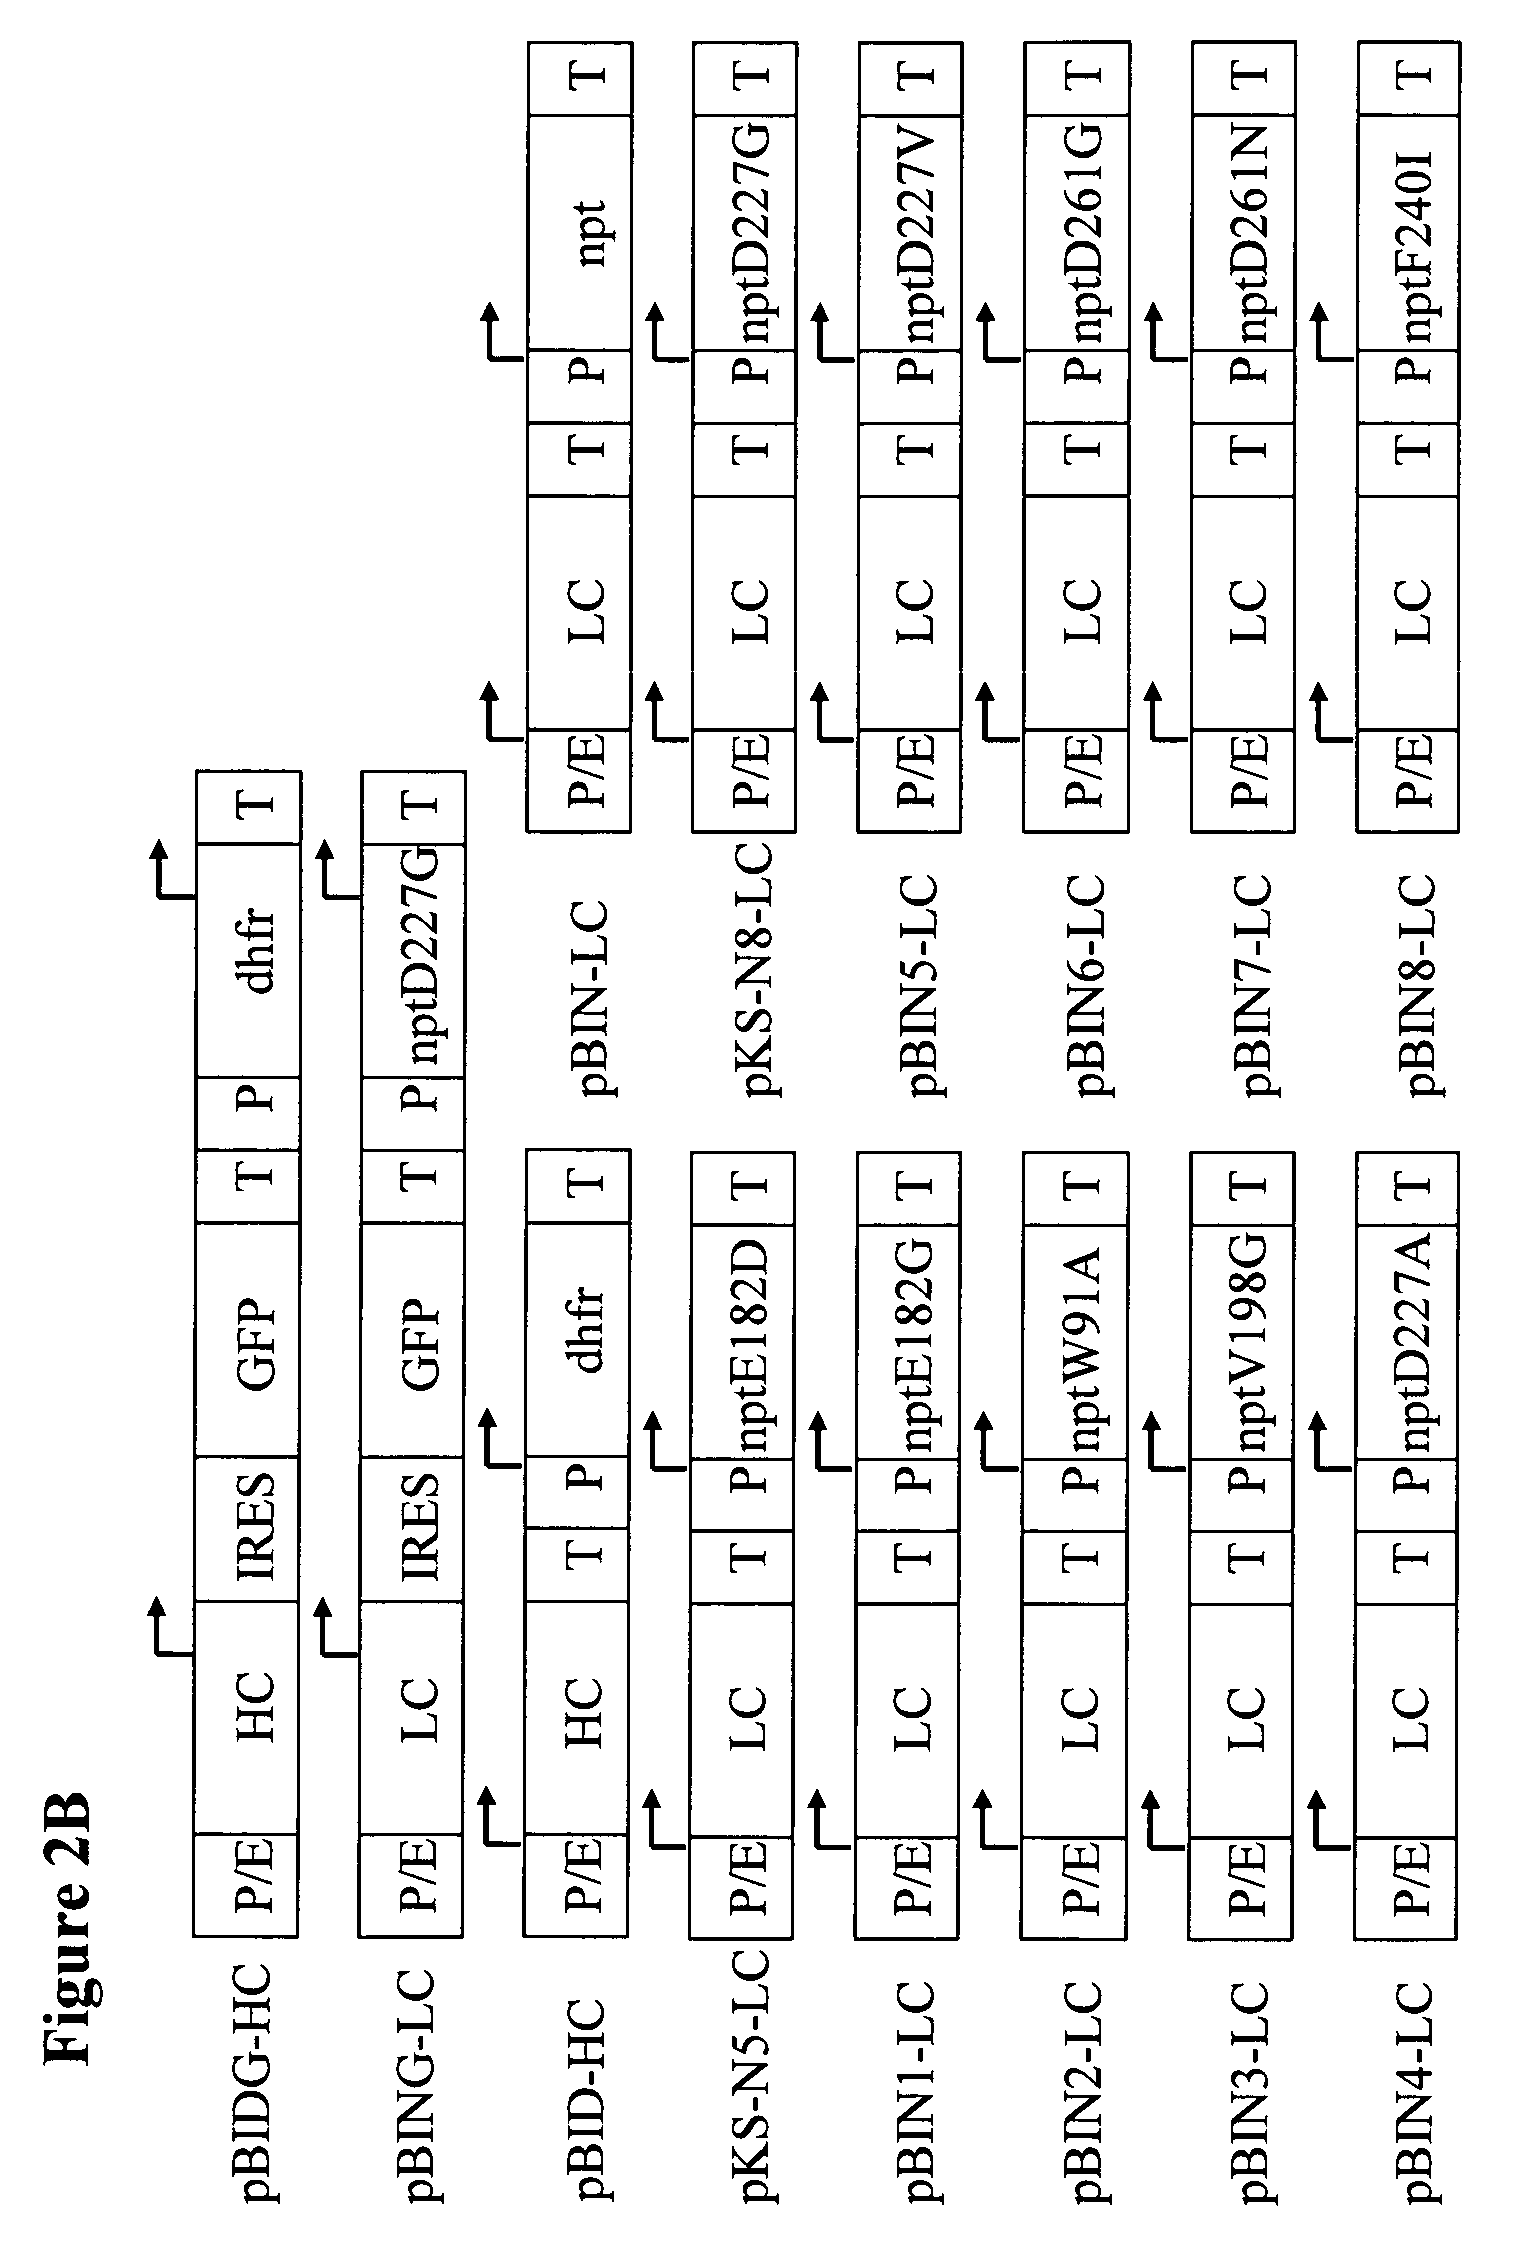 Neomycin-phosphotransferase-genes and methods for the selection of recombinant cells producing high levels of a desired gene product